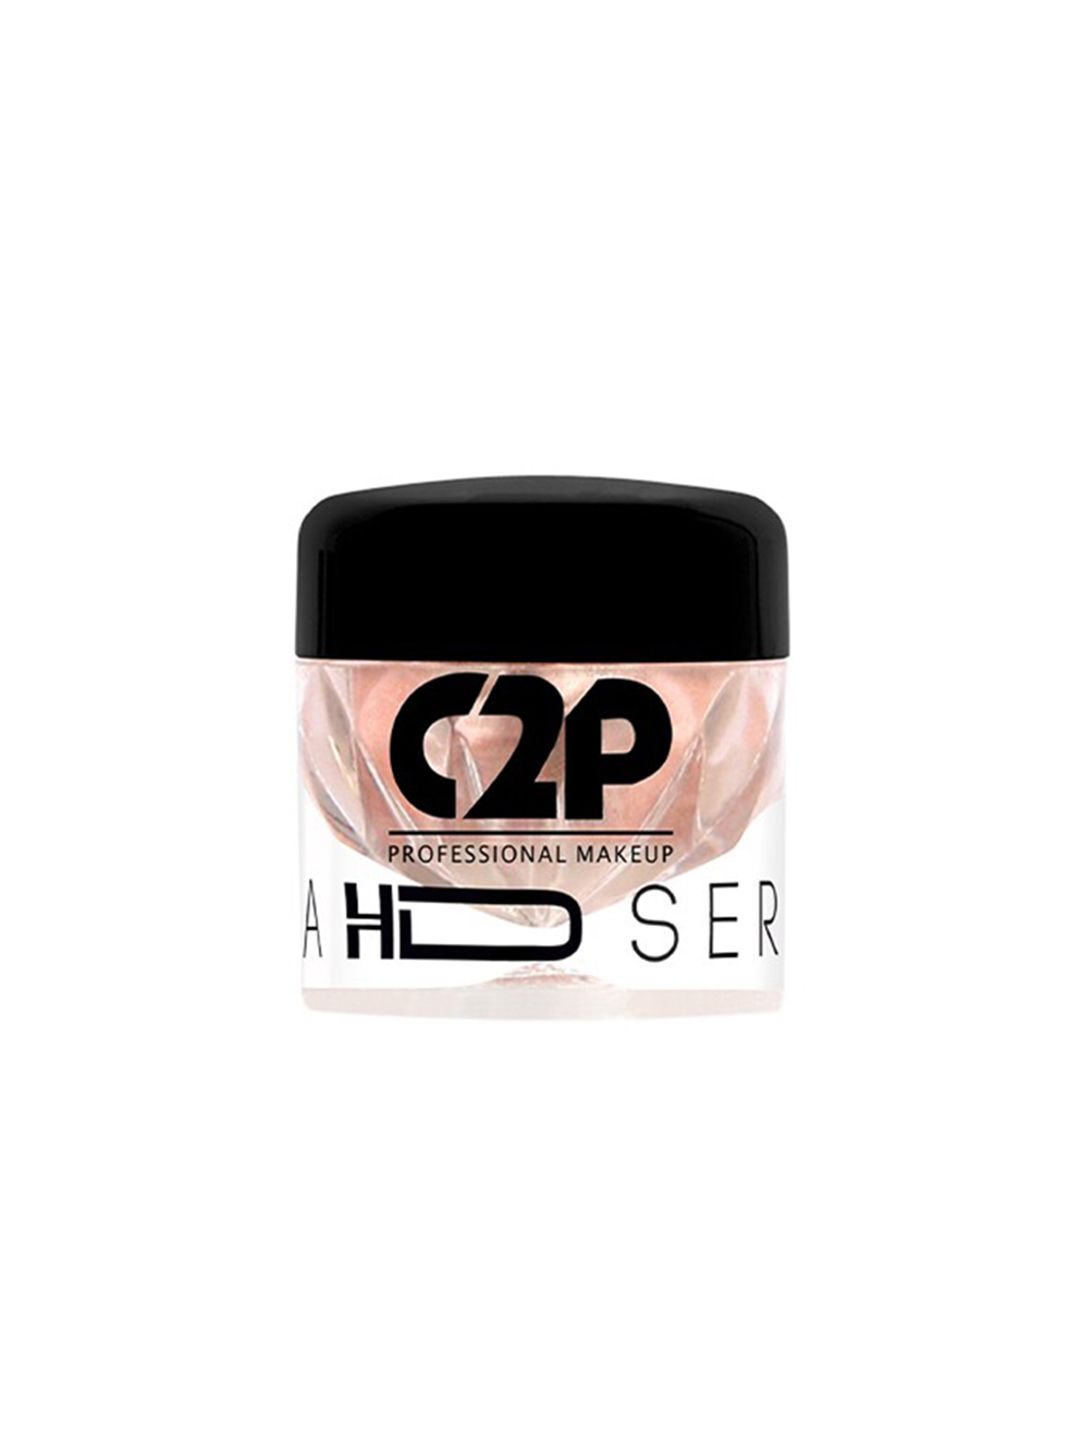 C2P PROFESSIONAL MAKEUP HD Loose Precious Pigments Eyeshadow - Jewel Effect 114 Price in India